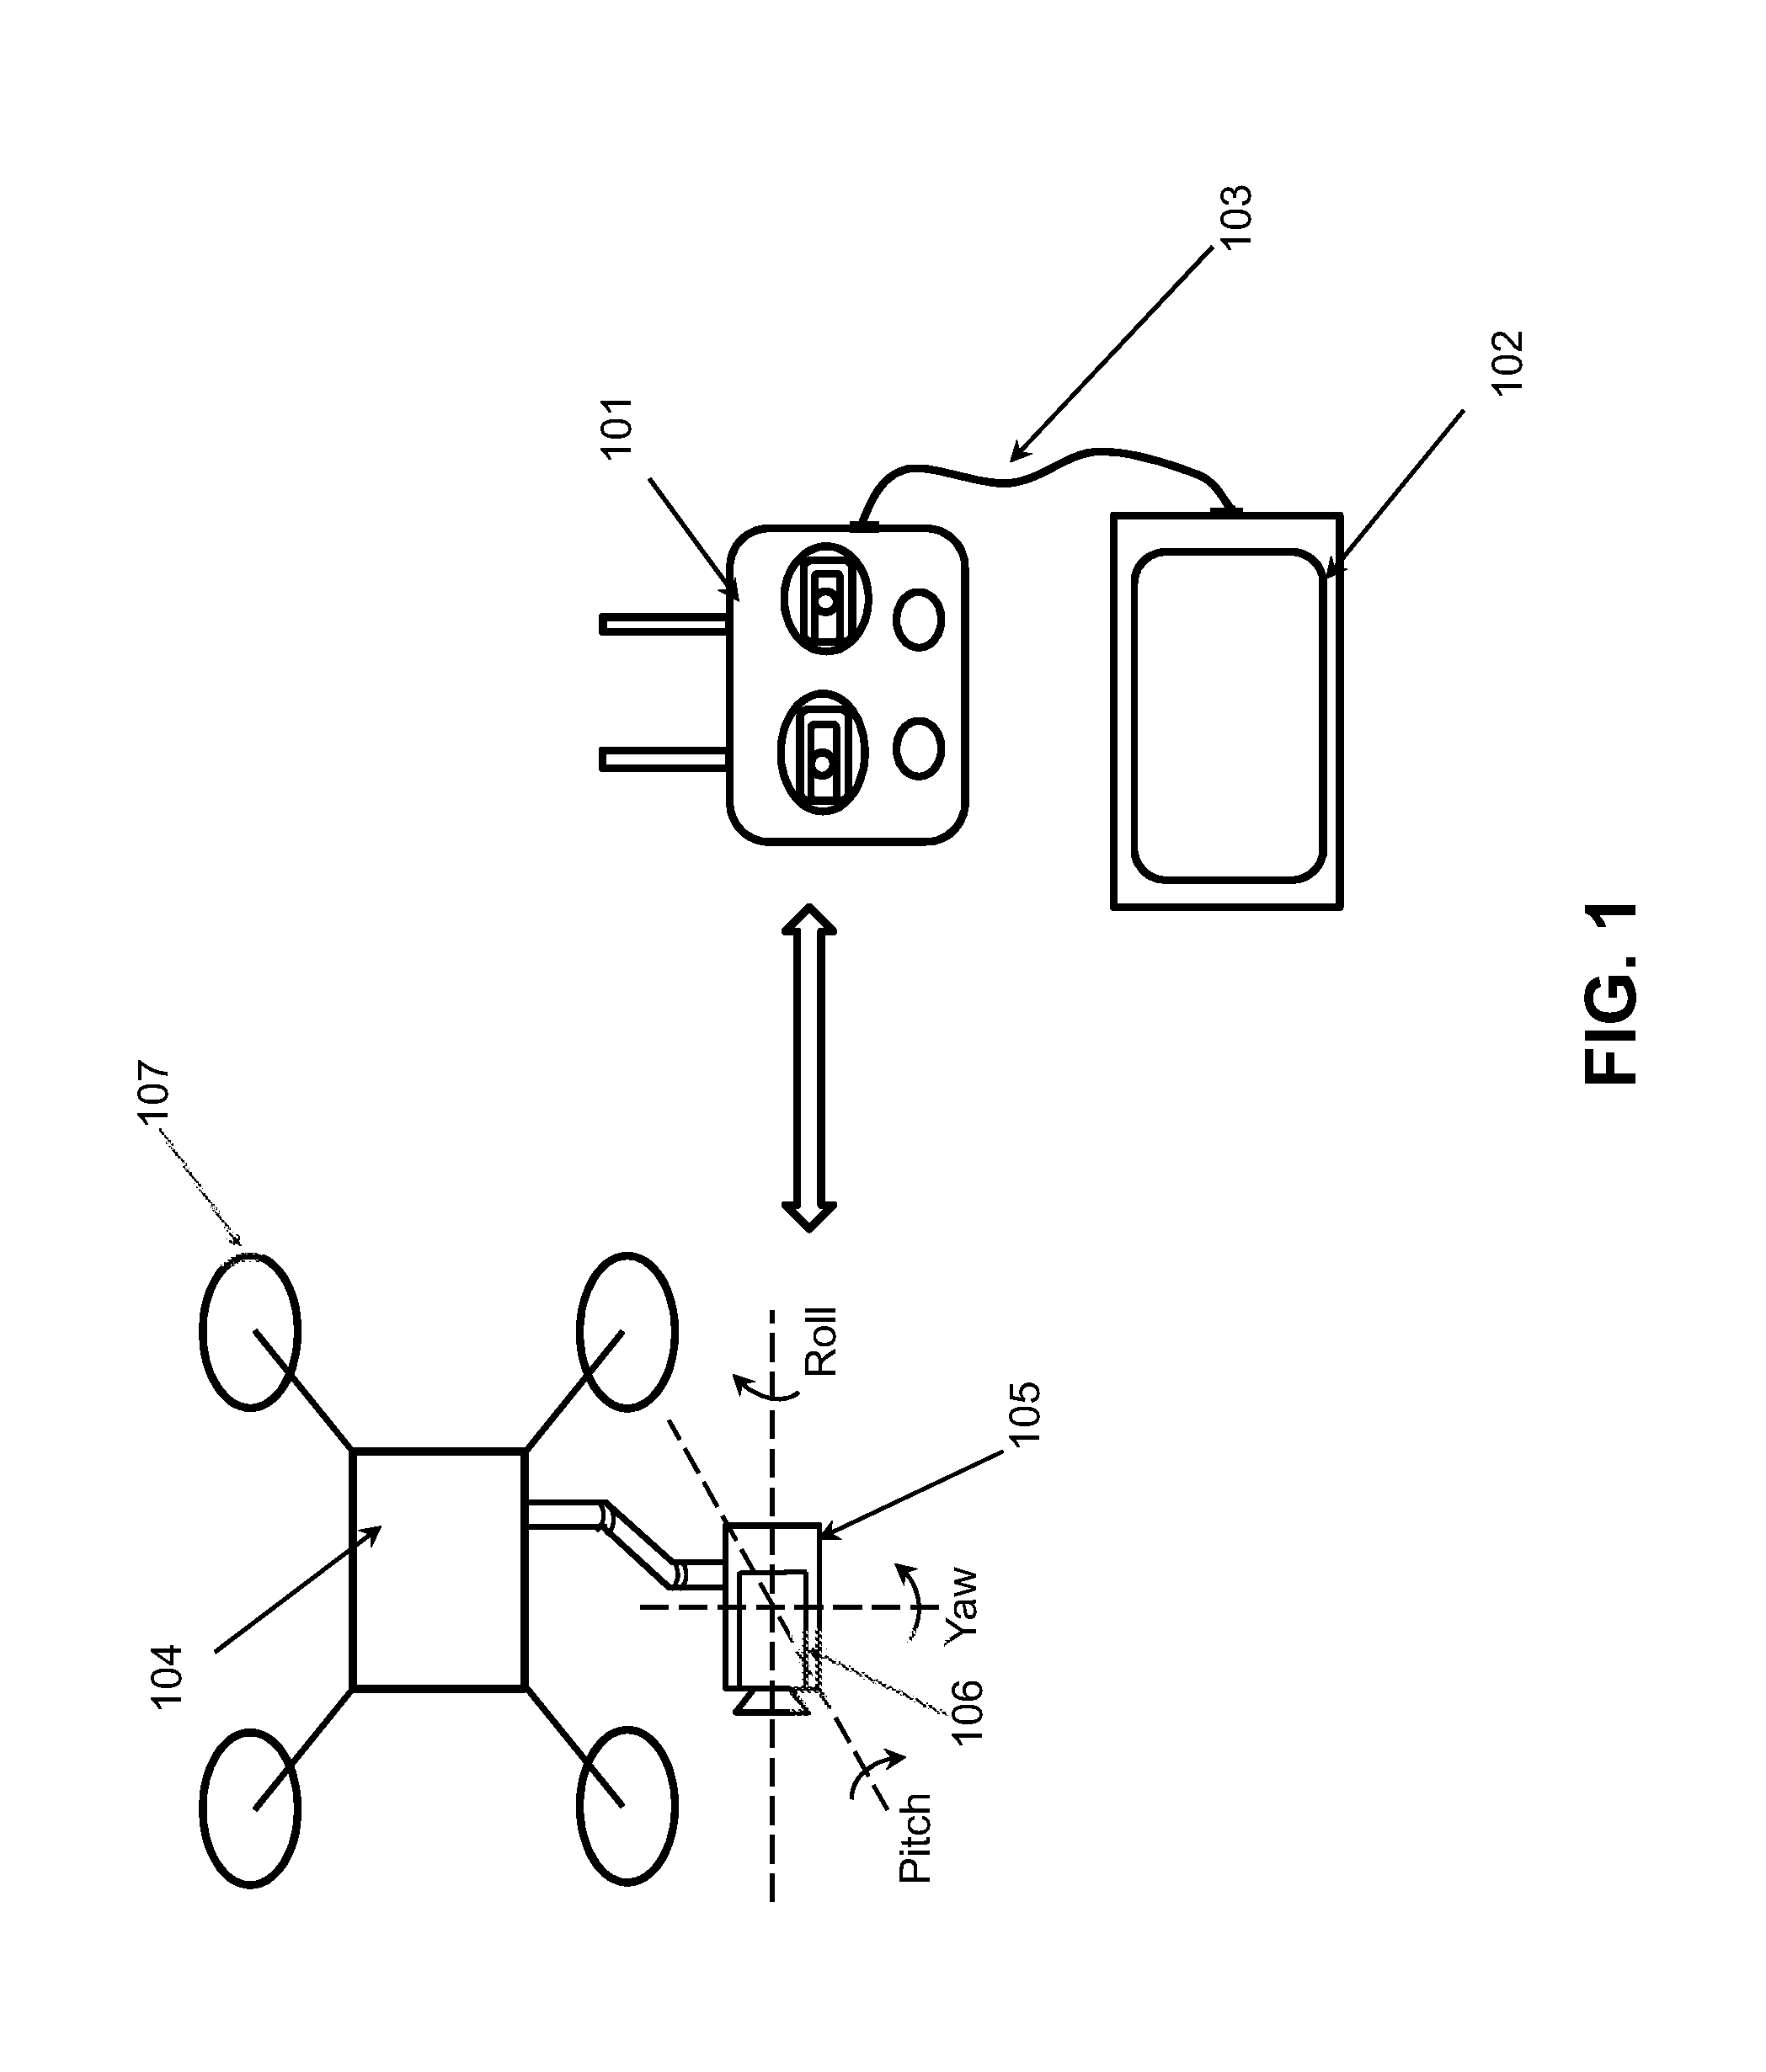 Systems and methods for gimbal simulation